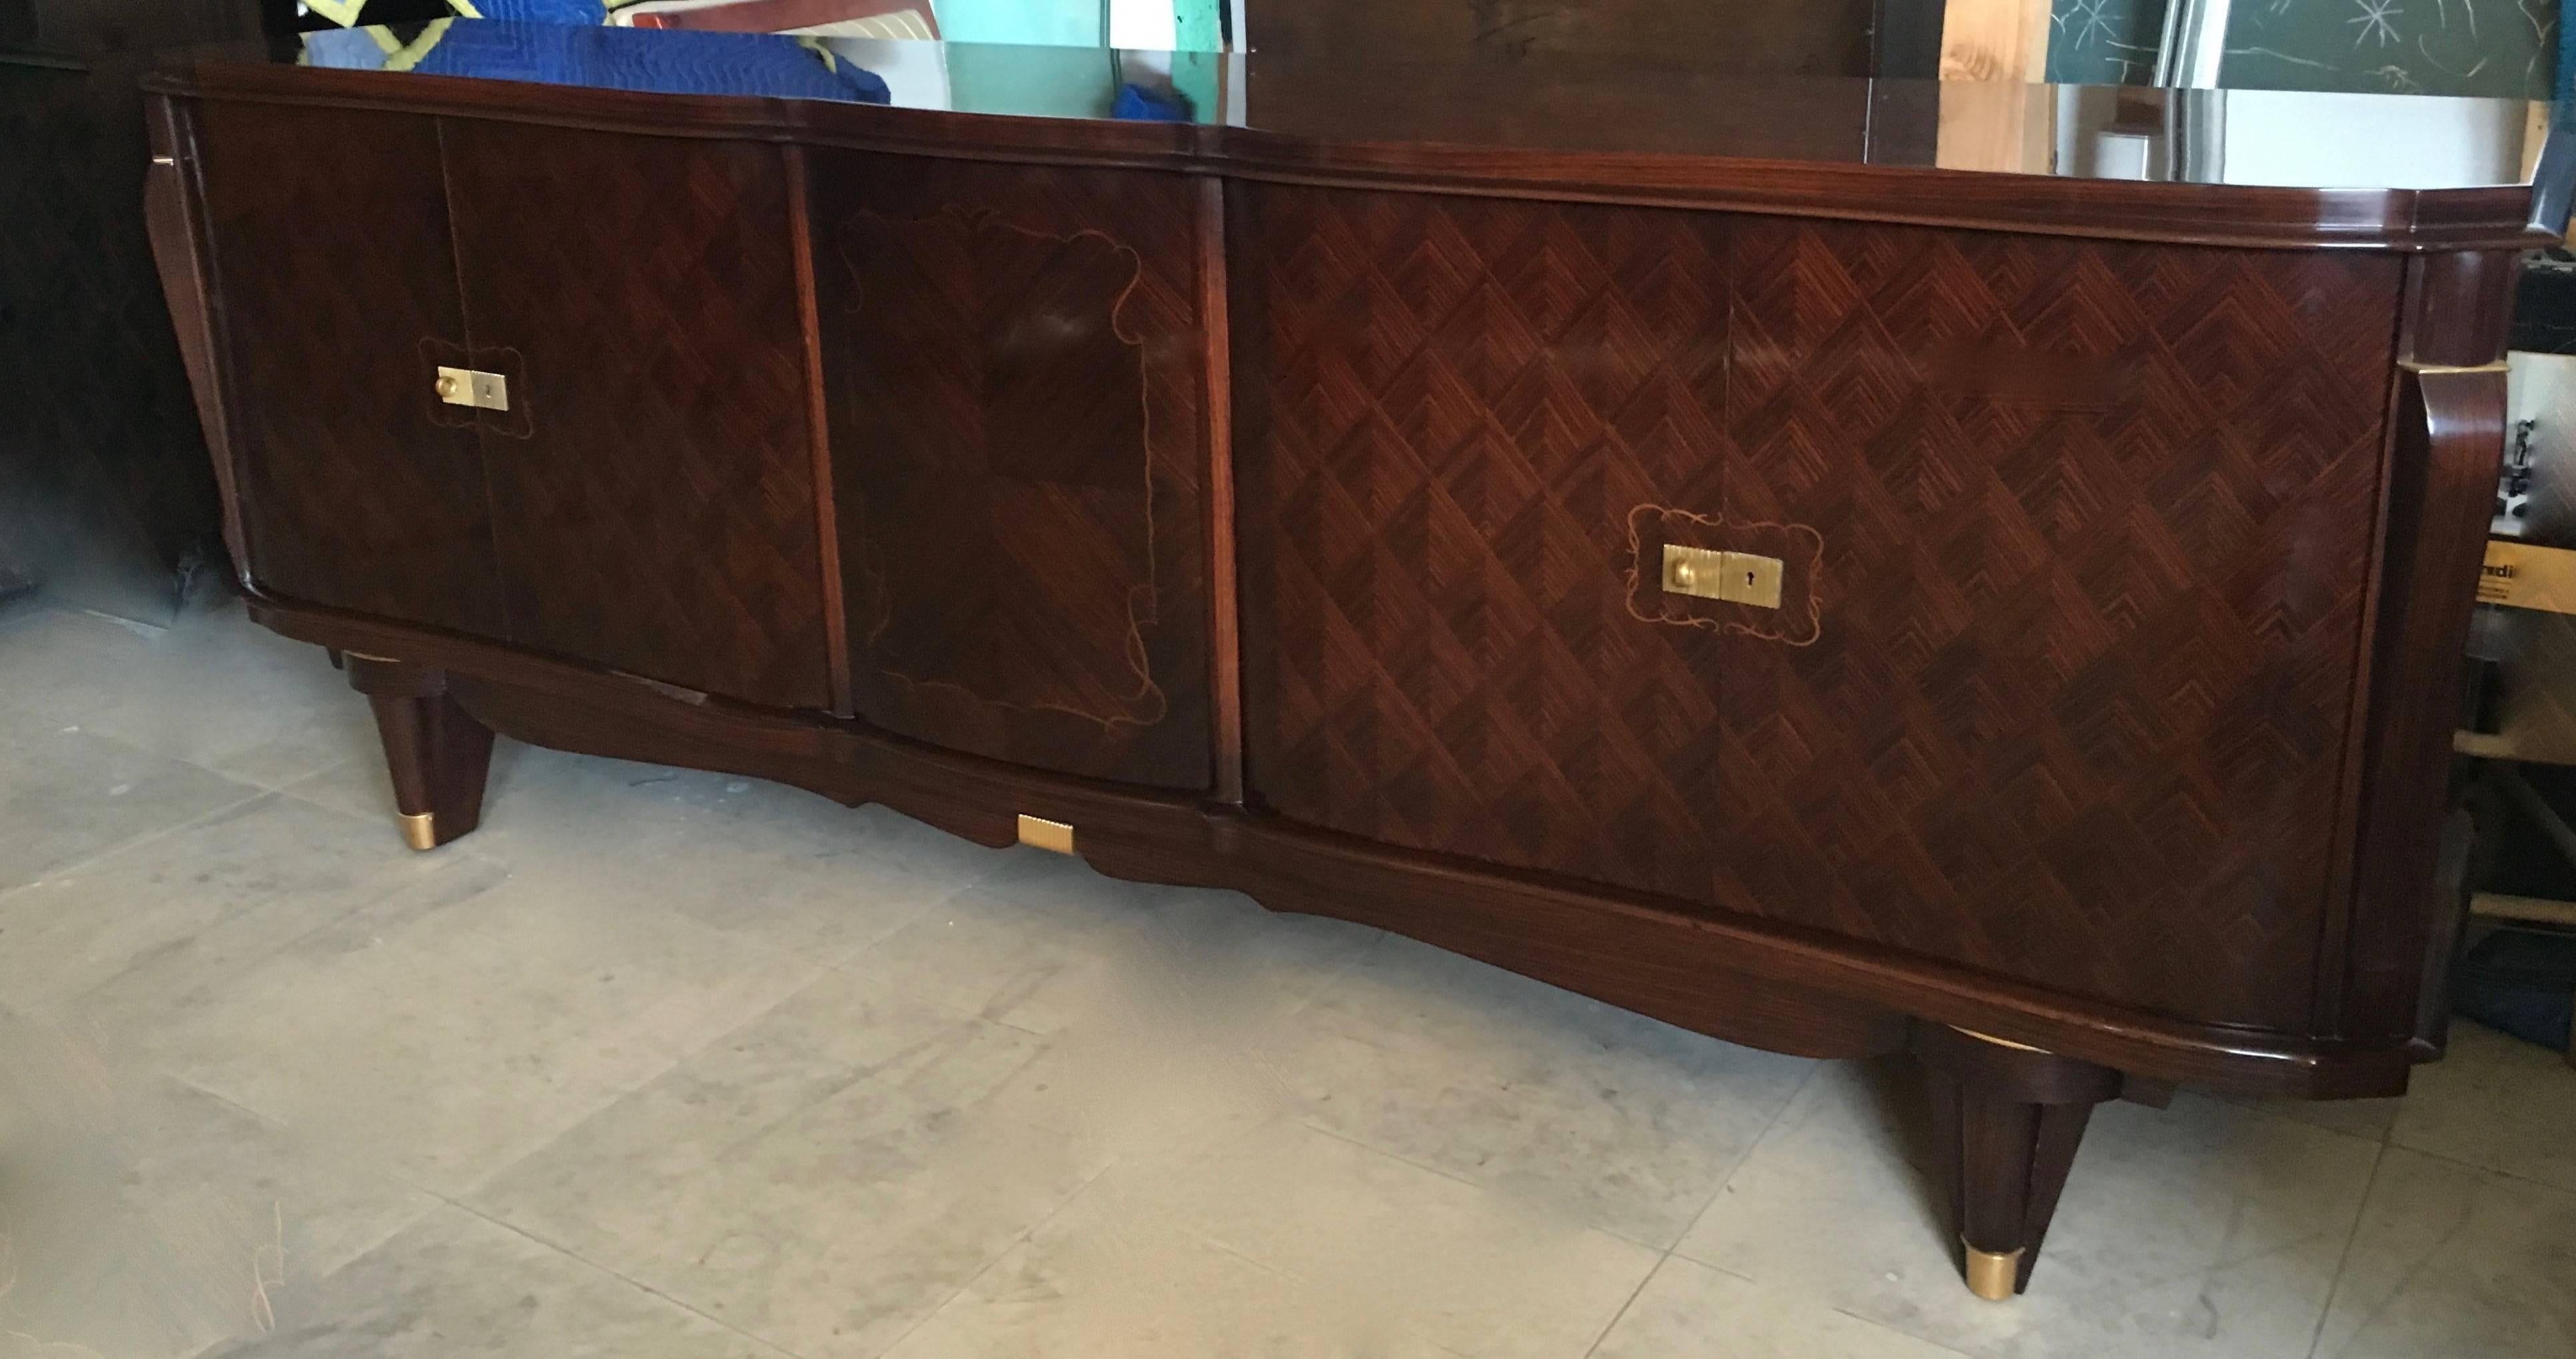 French deco buffet in Macassar ebony diamond inlay, circa 1940. Bronze detailing on legs and stand and lower middle - 5th door reveals six pristine red wool felt-lined drawers for your special linens, flatware, etc.

This piece is pristine and